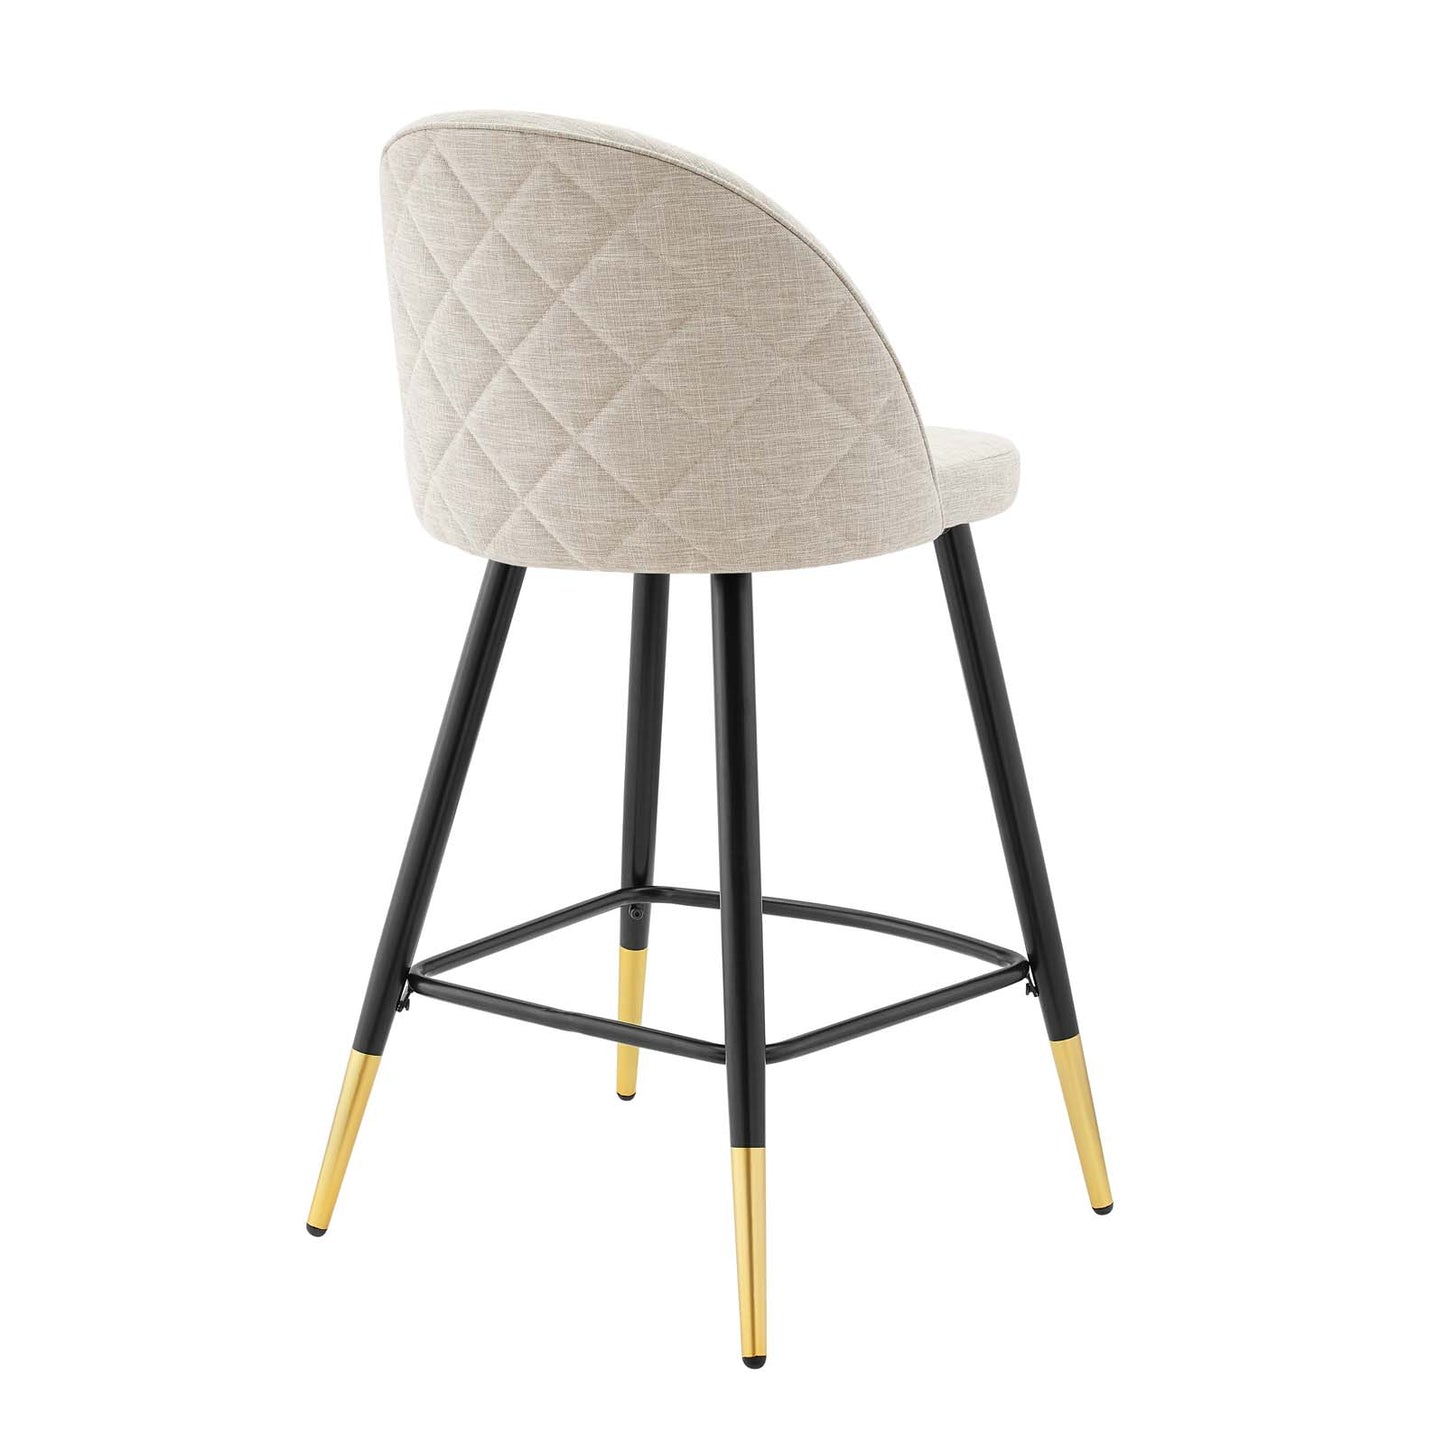 Cordial Fabric Counter Stools - Set of 2 Beige EEI-4528-BEI